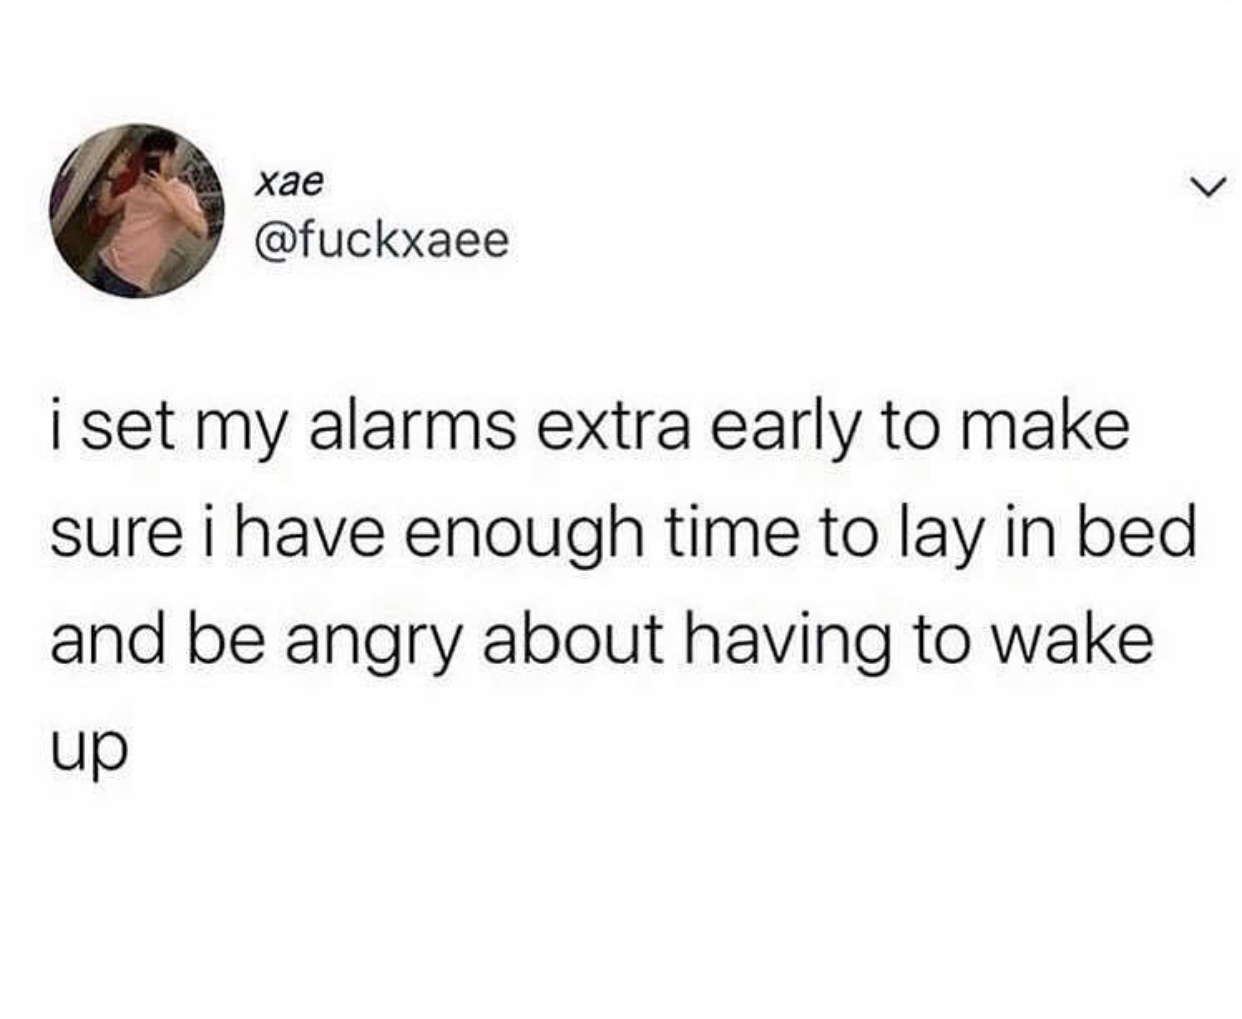 stuart little car meme - Xae i set my alarms extra early to make sure i have enough time to lay in bed and be angry about having to wake up